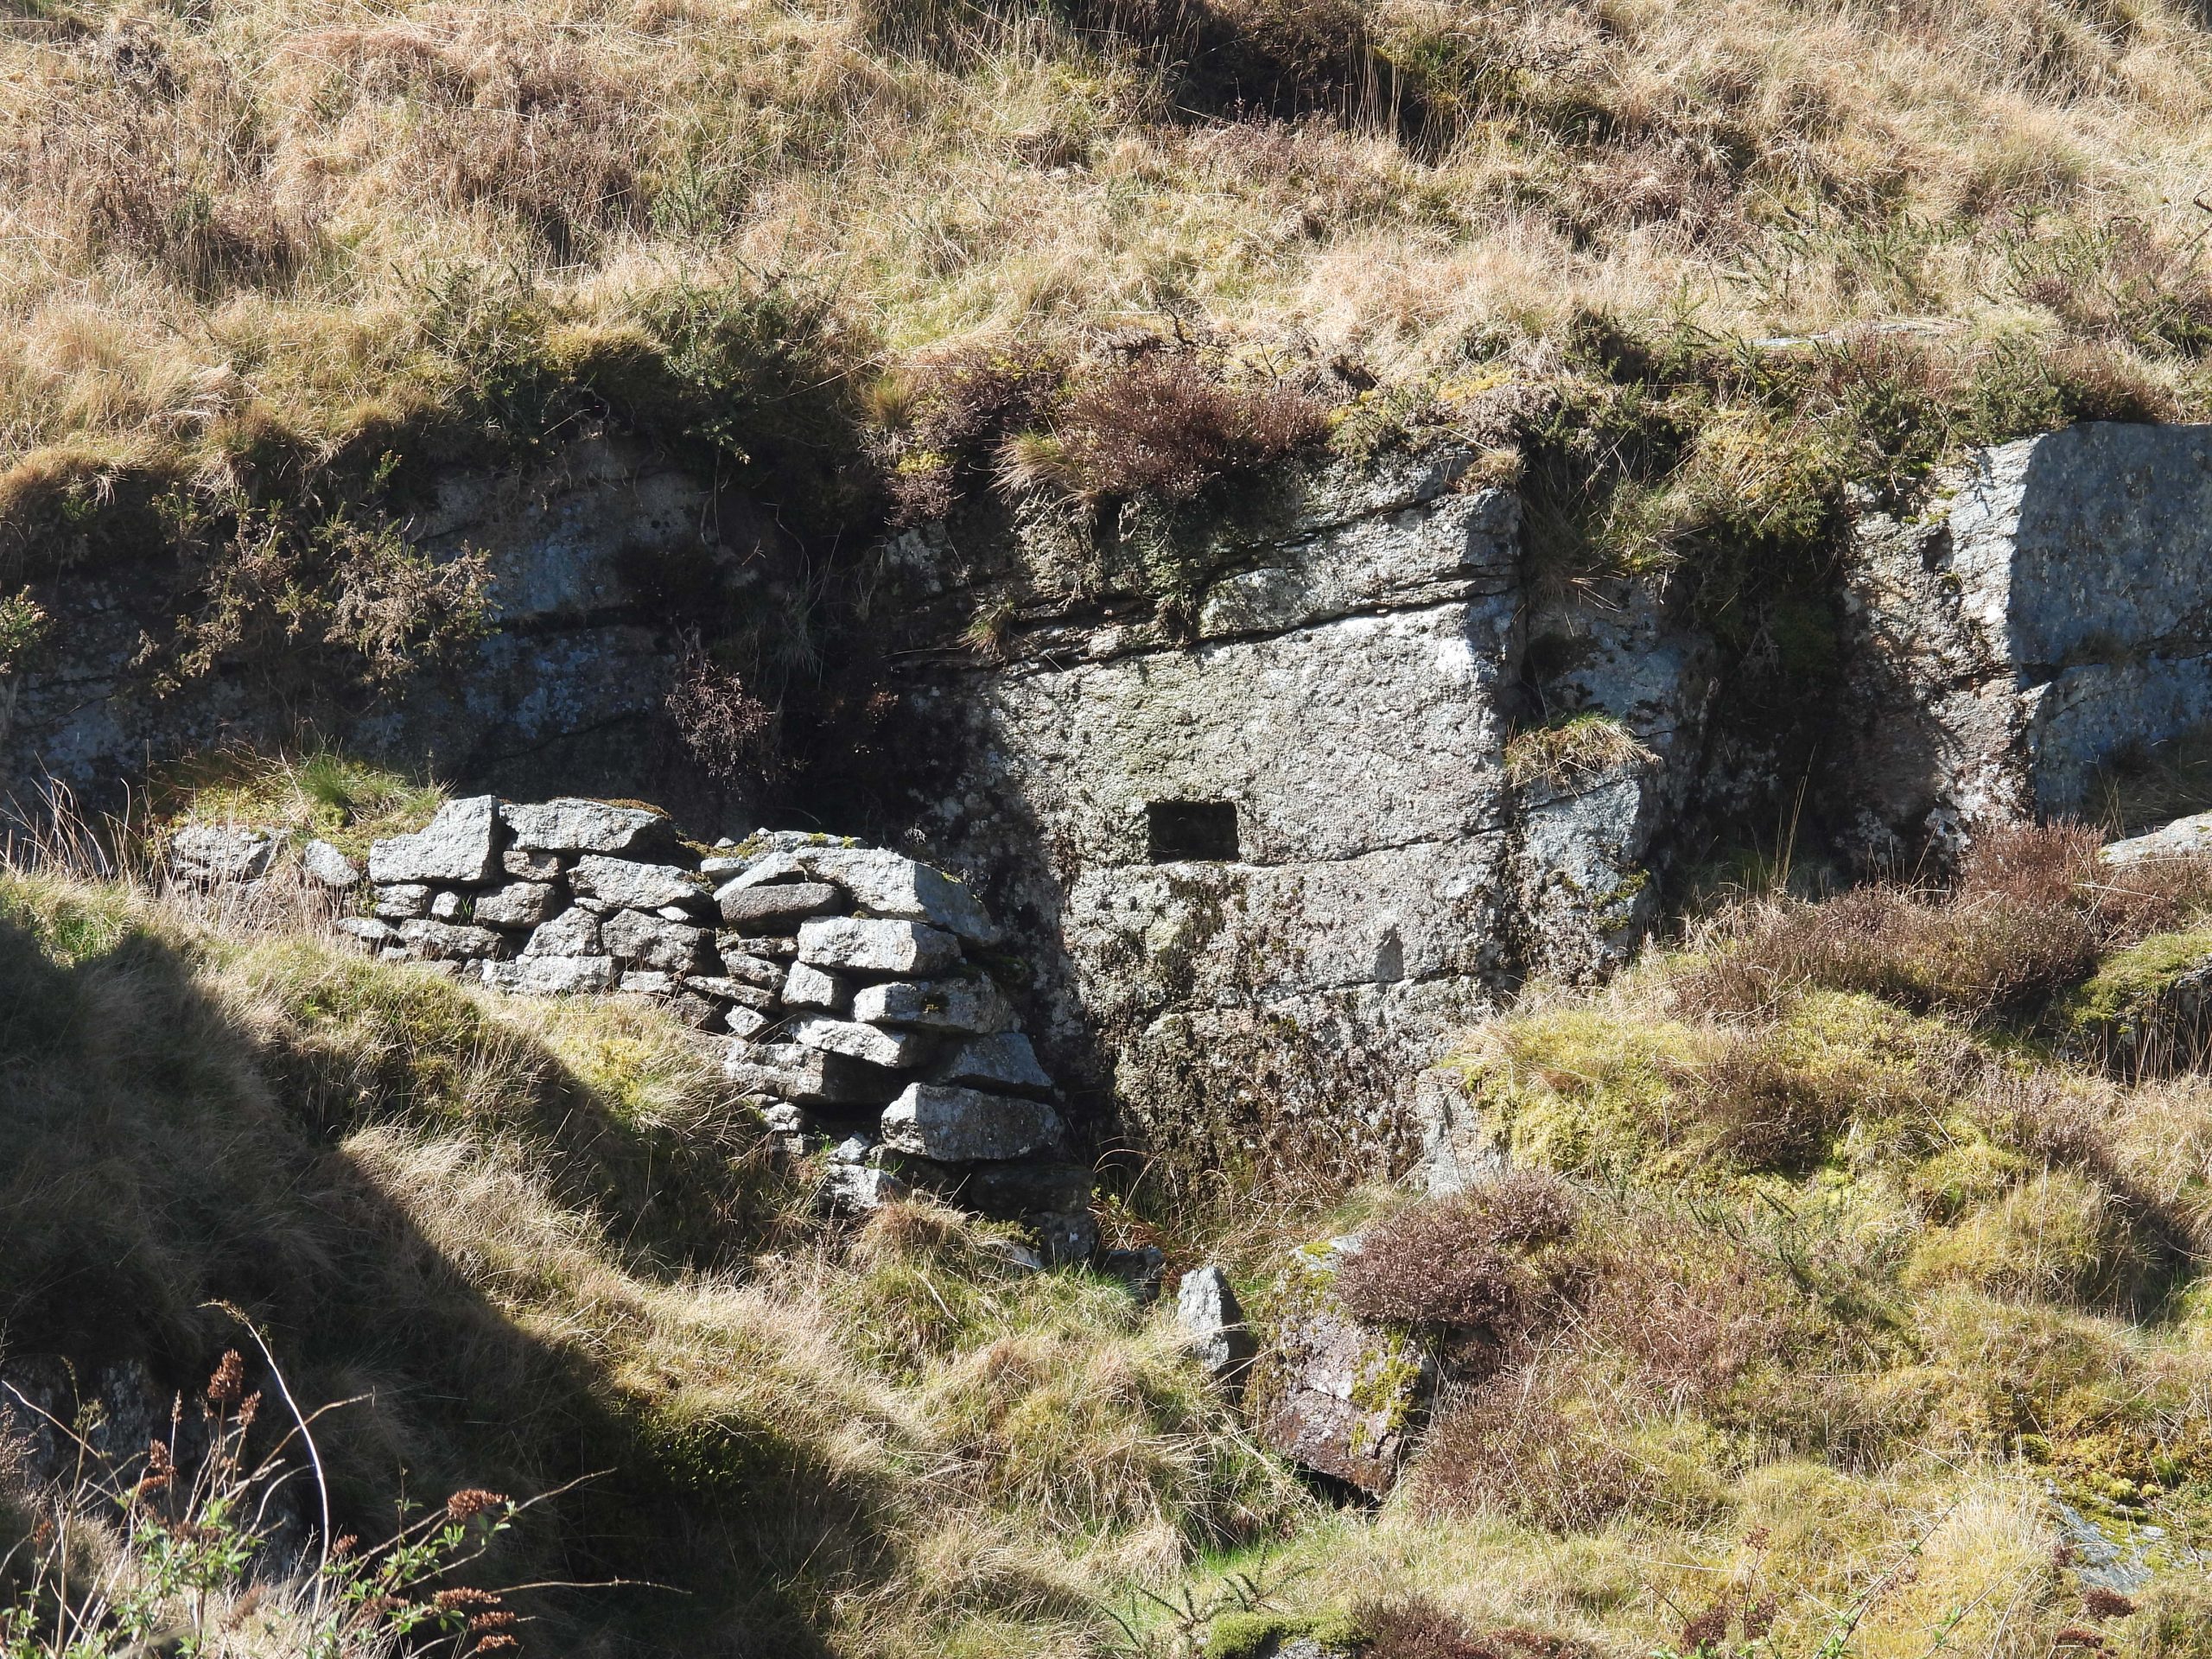 41. Old Structure in Quarry